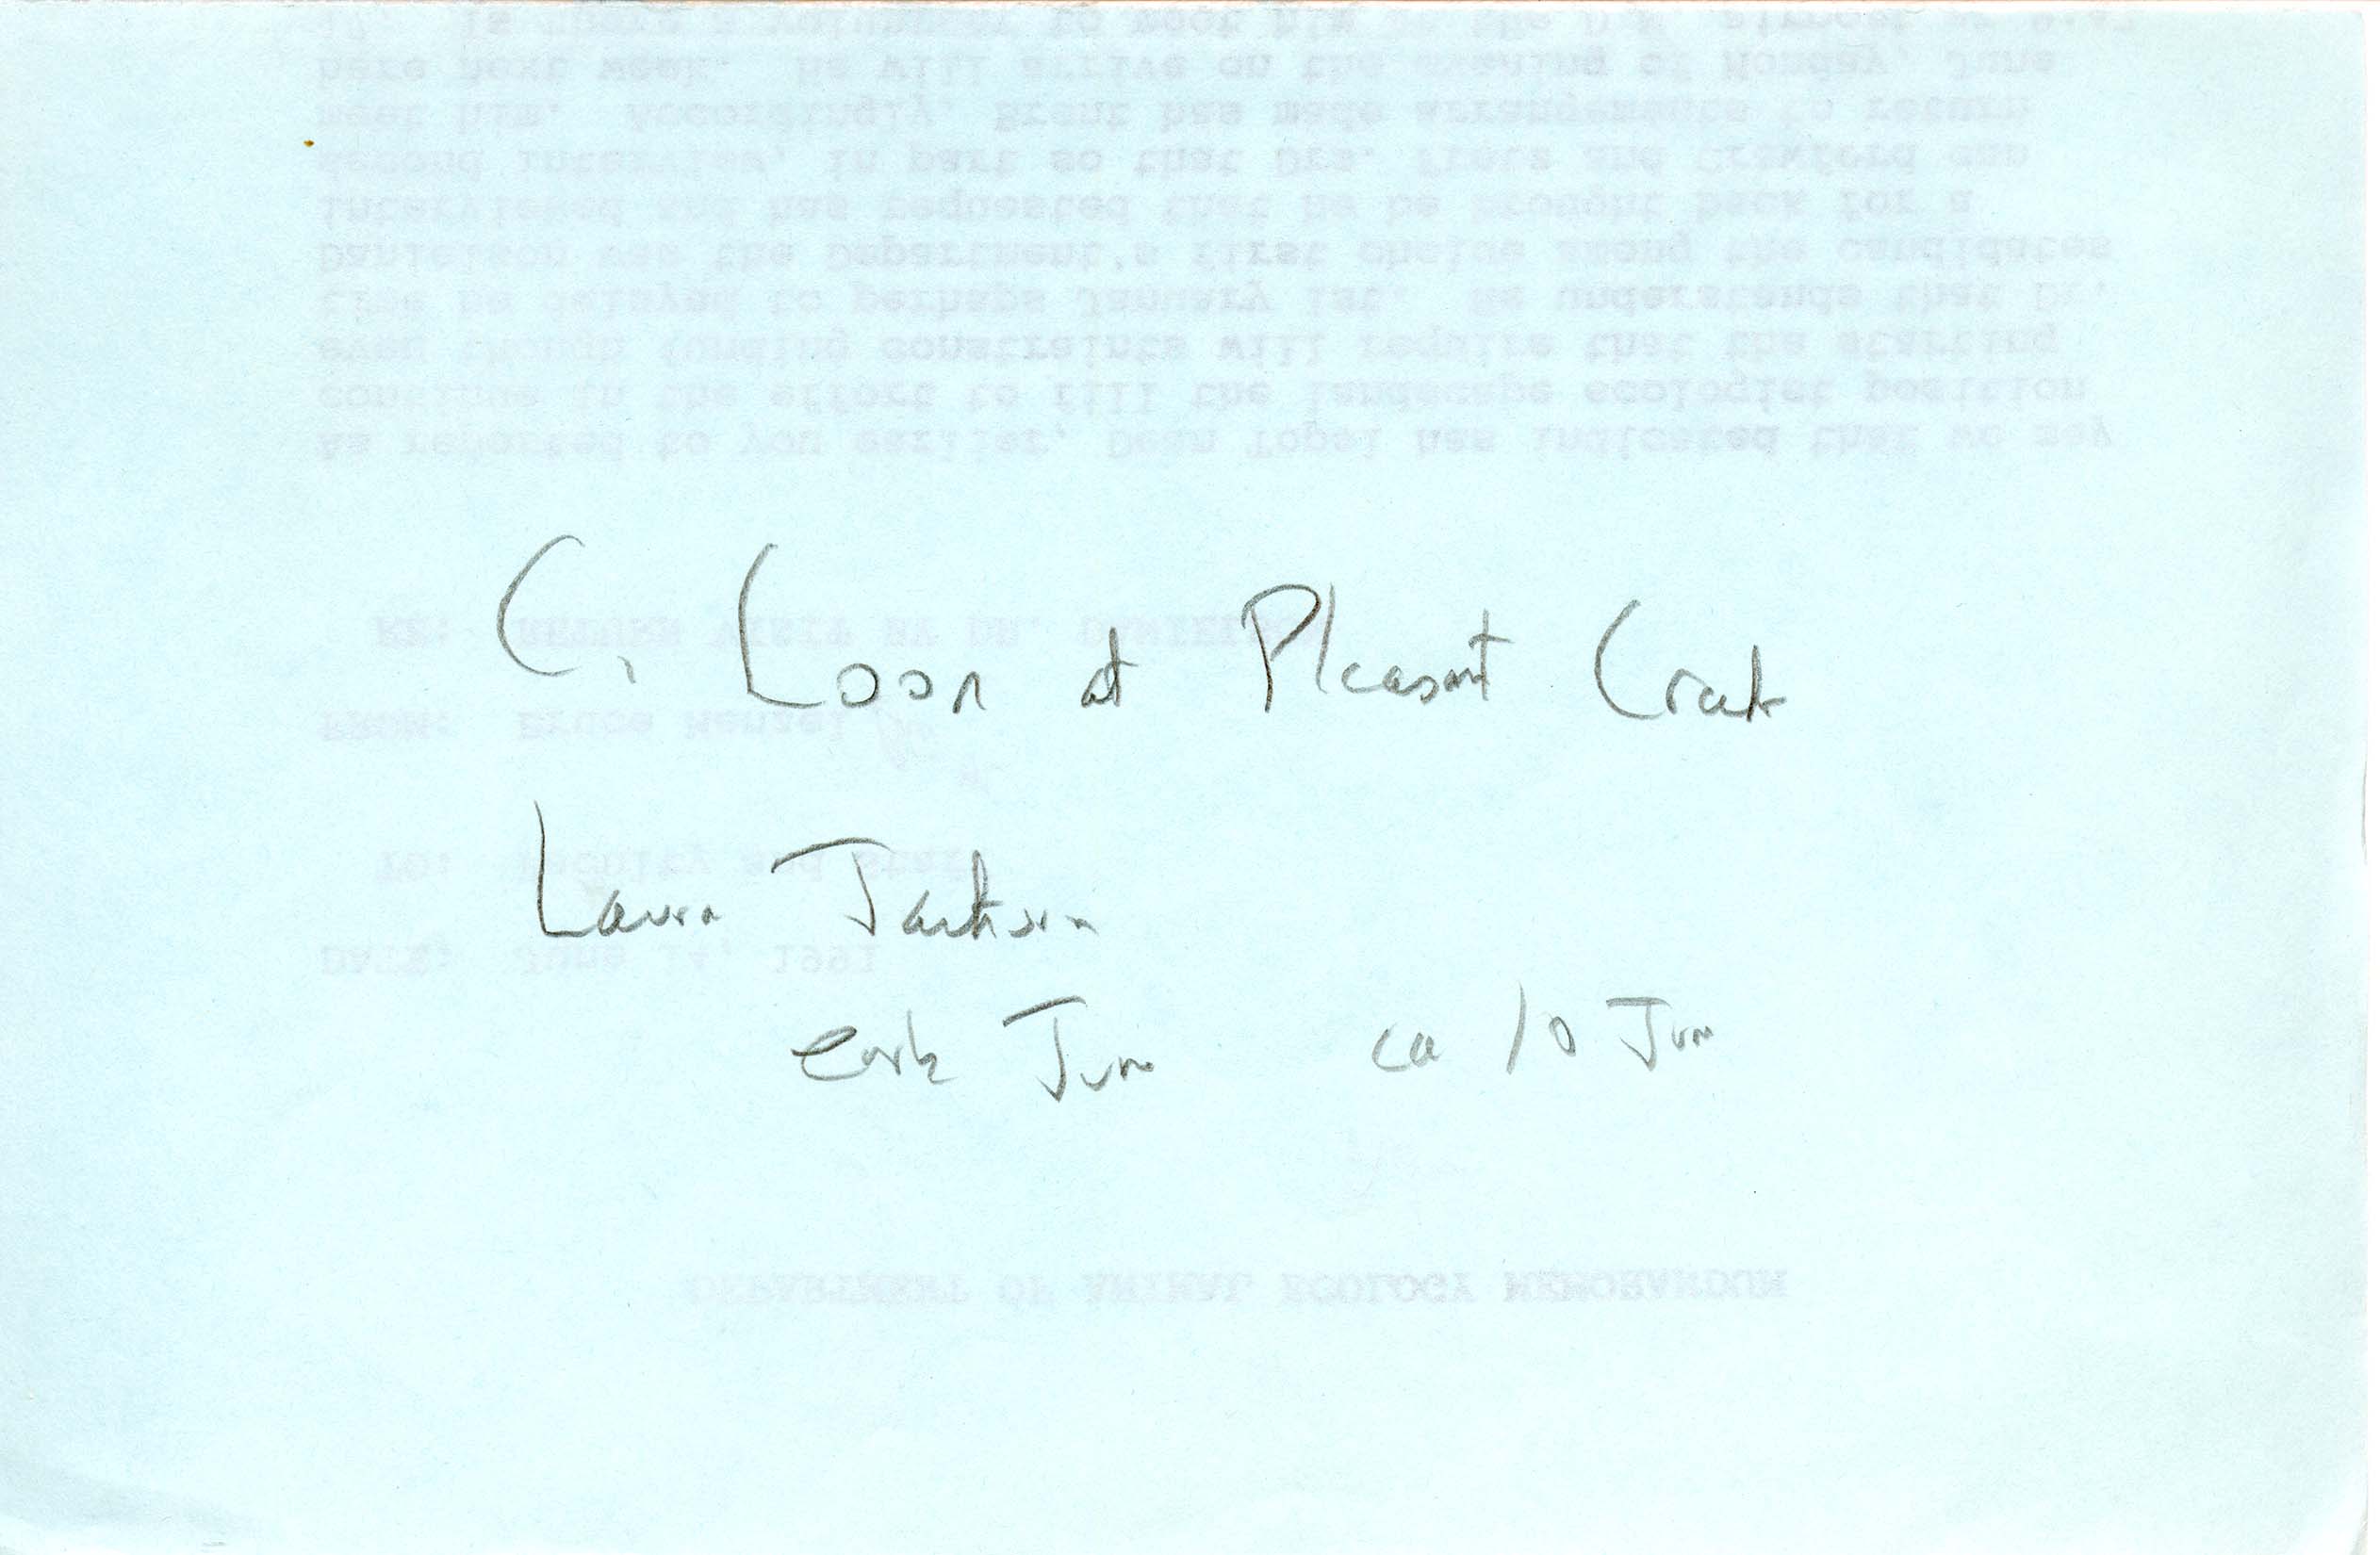 Field notes contributed by Laura Spess Jackson, June 10, 1991